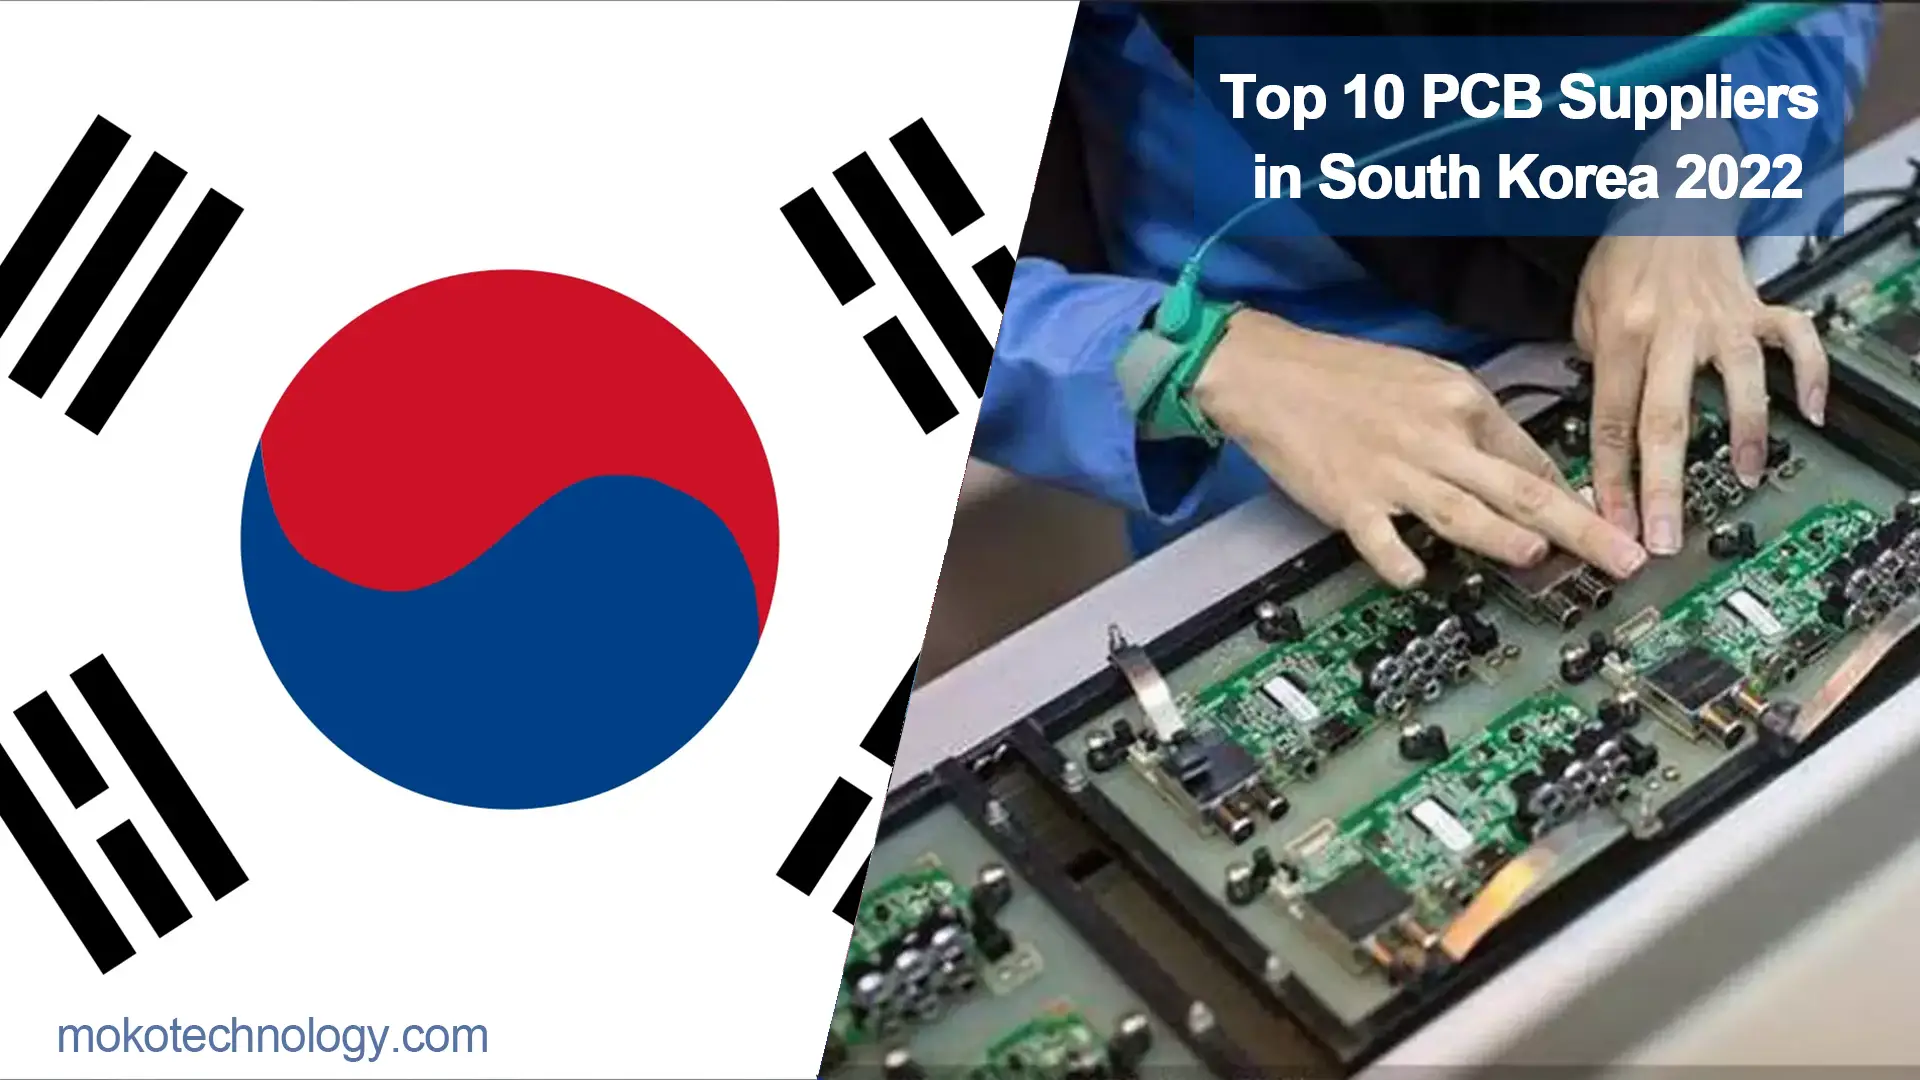 Tops 10 PCB Suppliers in South Korea 2022